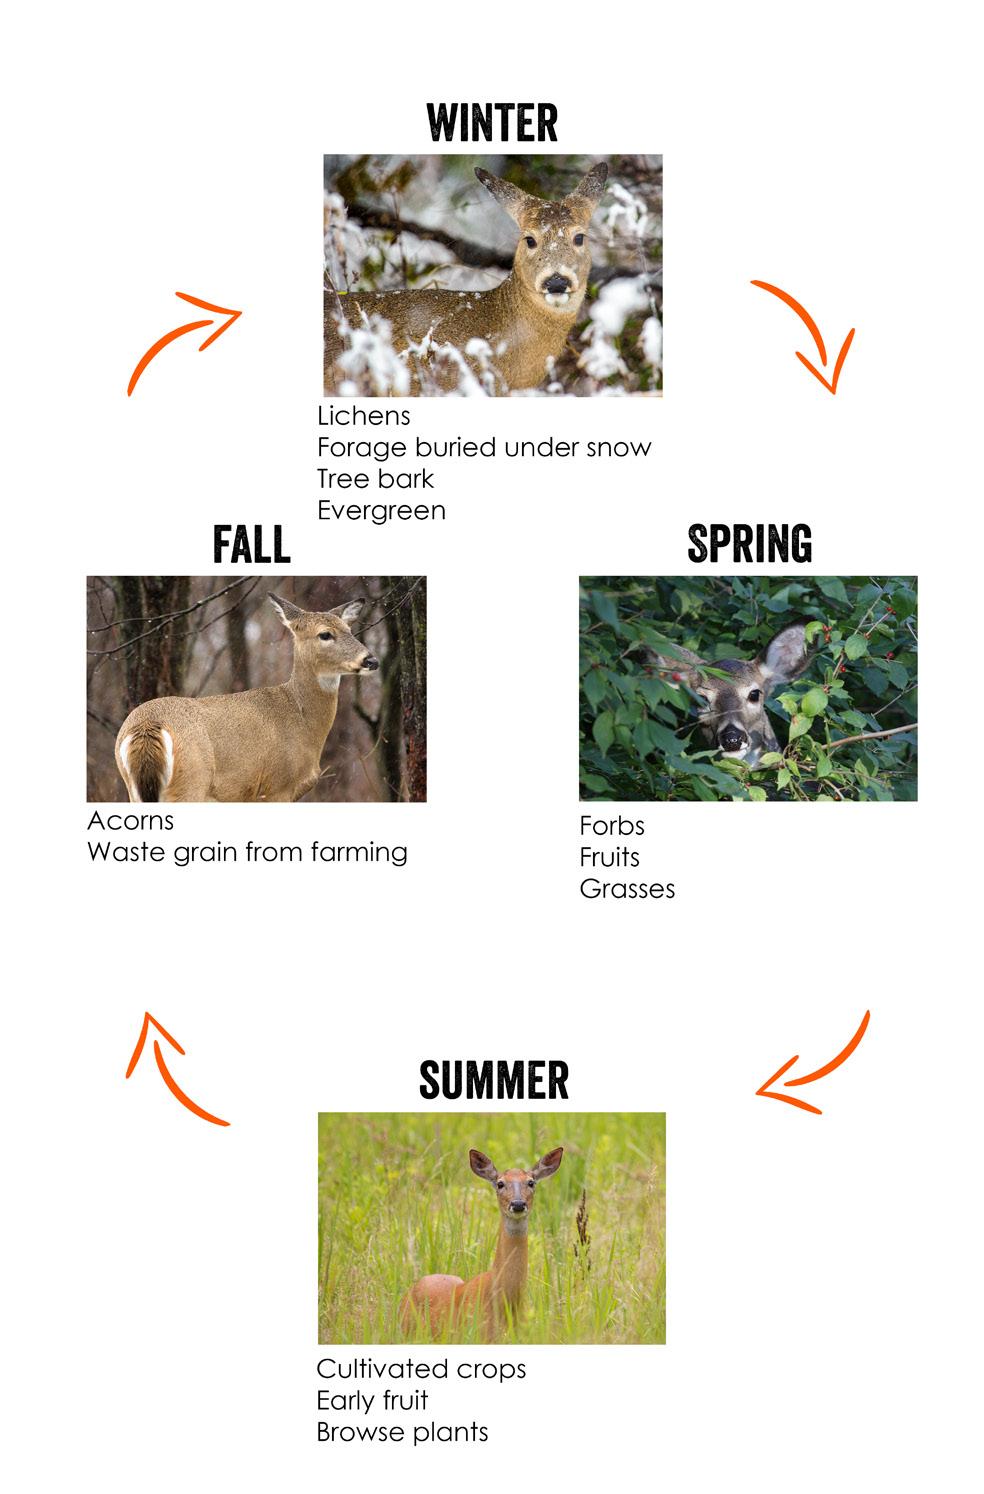 feeding habits Deer Ecology THE RUT Deer ecology The rut is the mating season for deer and is characterized by an increase in testosterone creating increased aggression towards other bucks